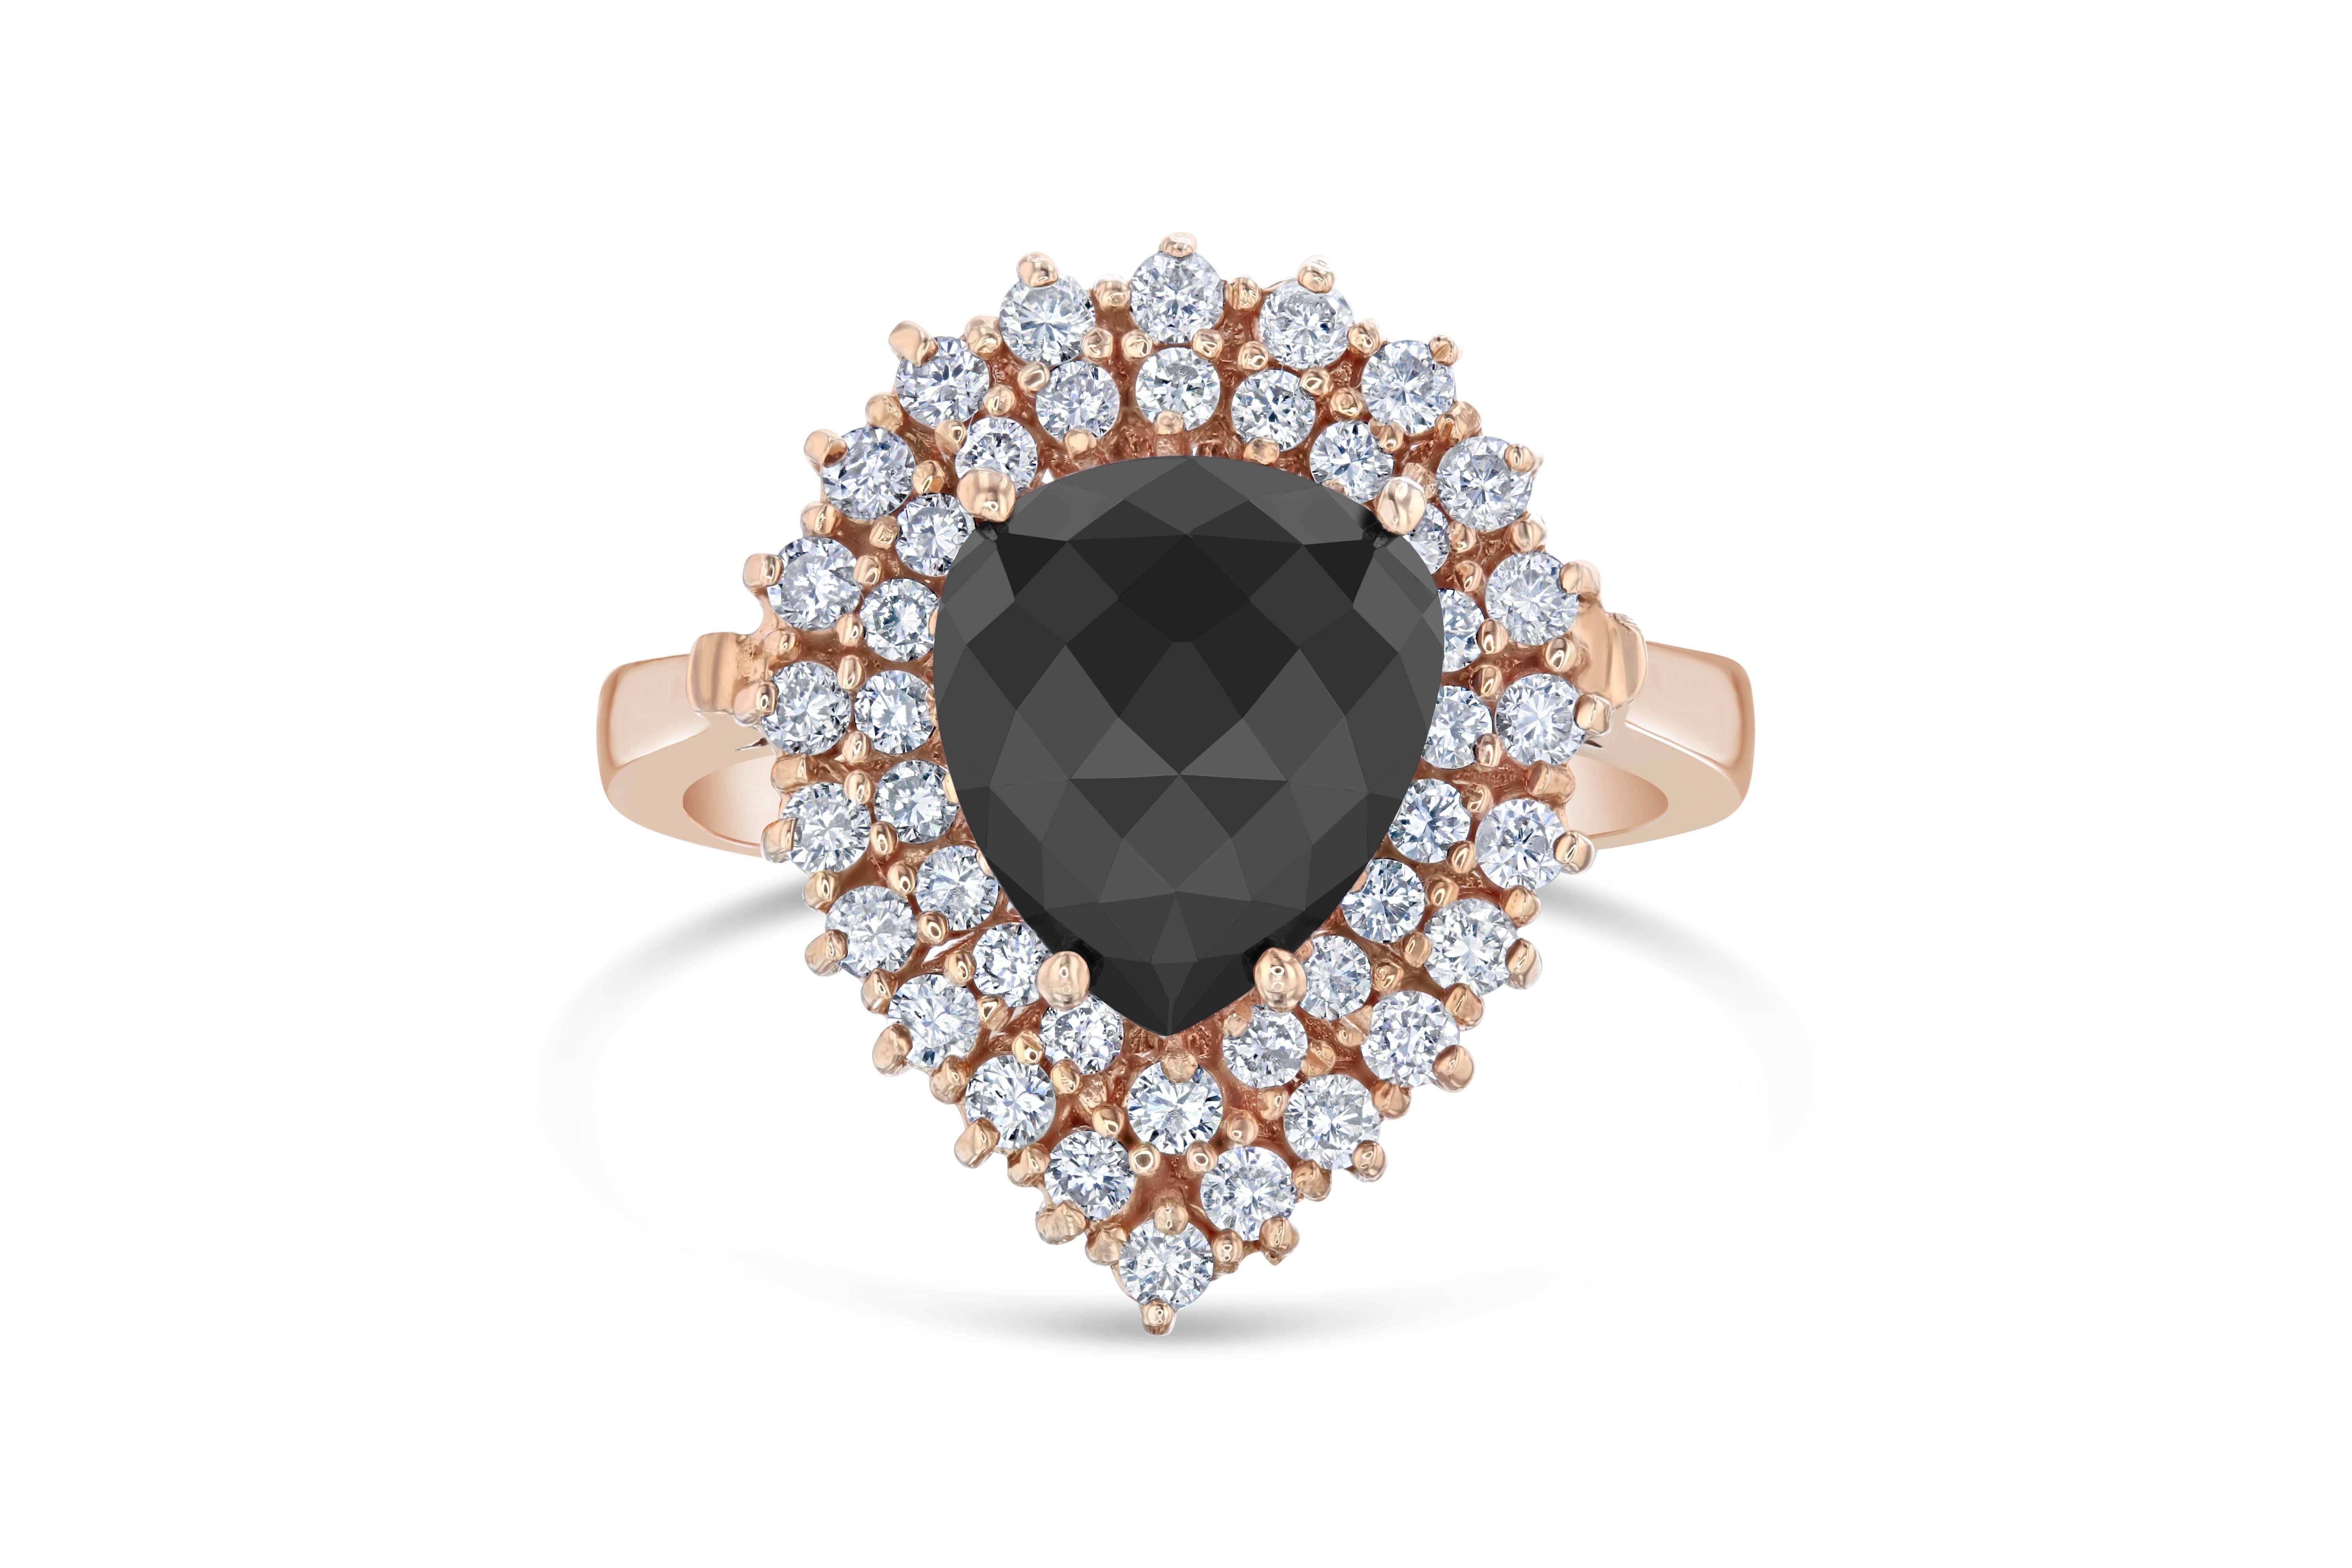 Pear Cut Black Diamond Cocktail Ring in a beautiful Rose Gold Setting

This gorgeous Rose Gold Black Diamond Ring has a center Pear Cut Black Diamond that weighs 2.29 Carats and has 43 White Round Cut Diamonds weighing 0.70 Carats. The total carat